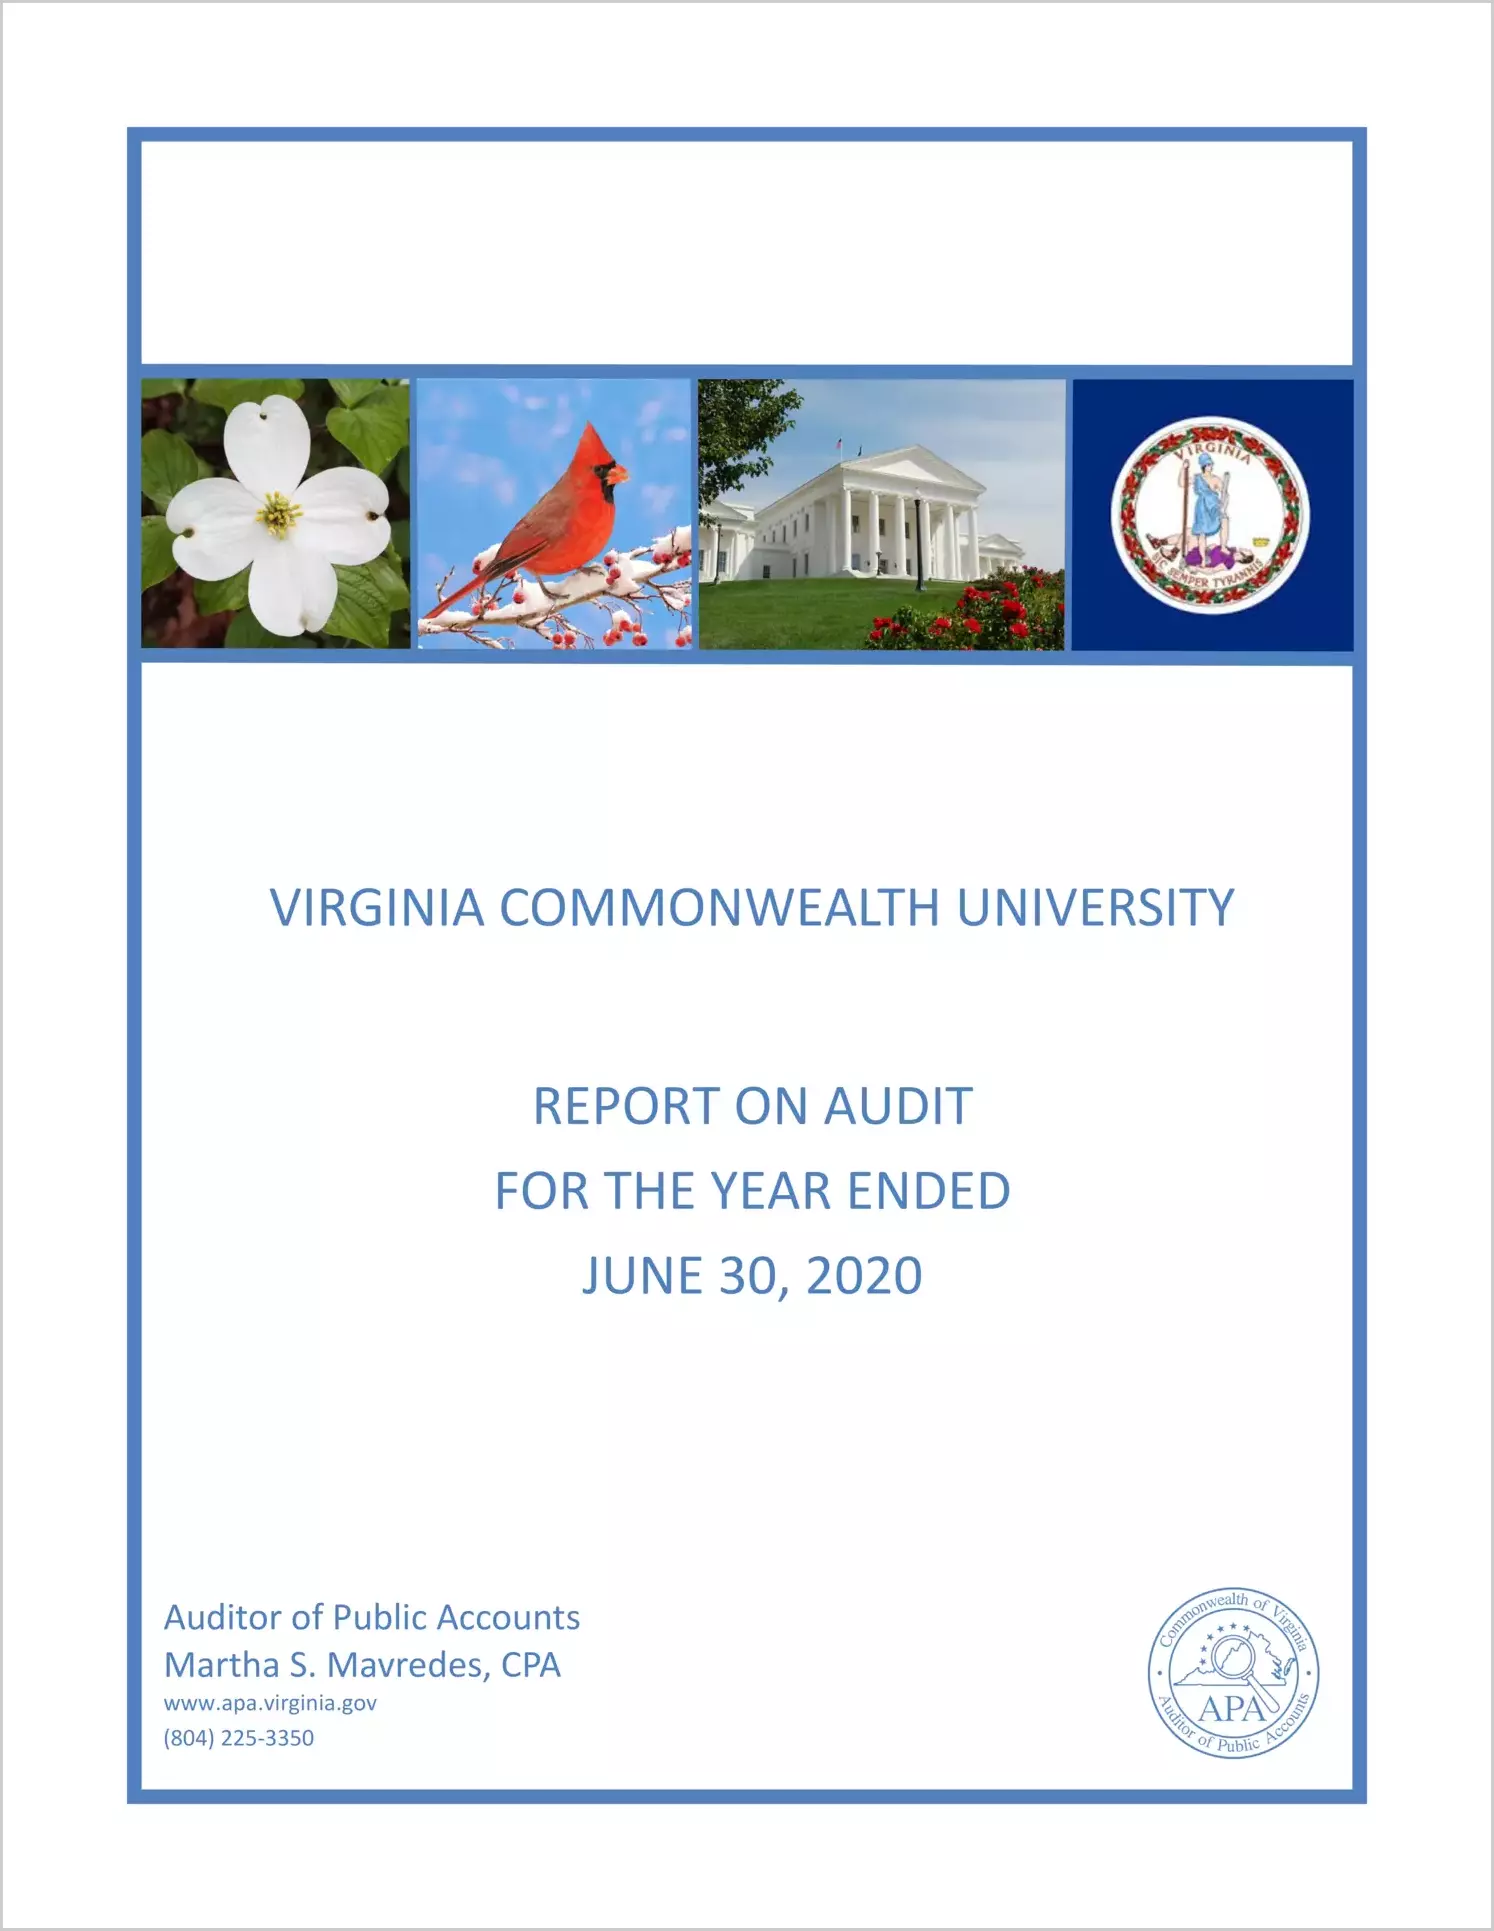 Virginia Commonwealth University for the year ended June 30, 2020